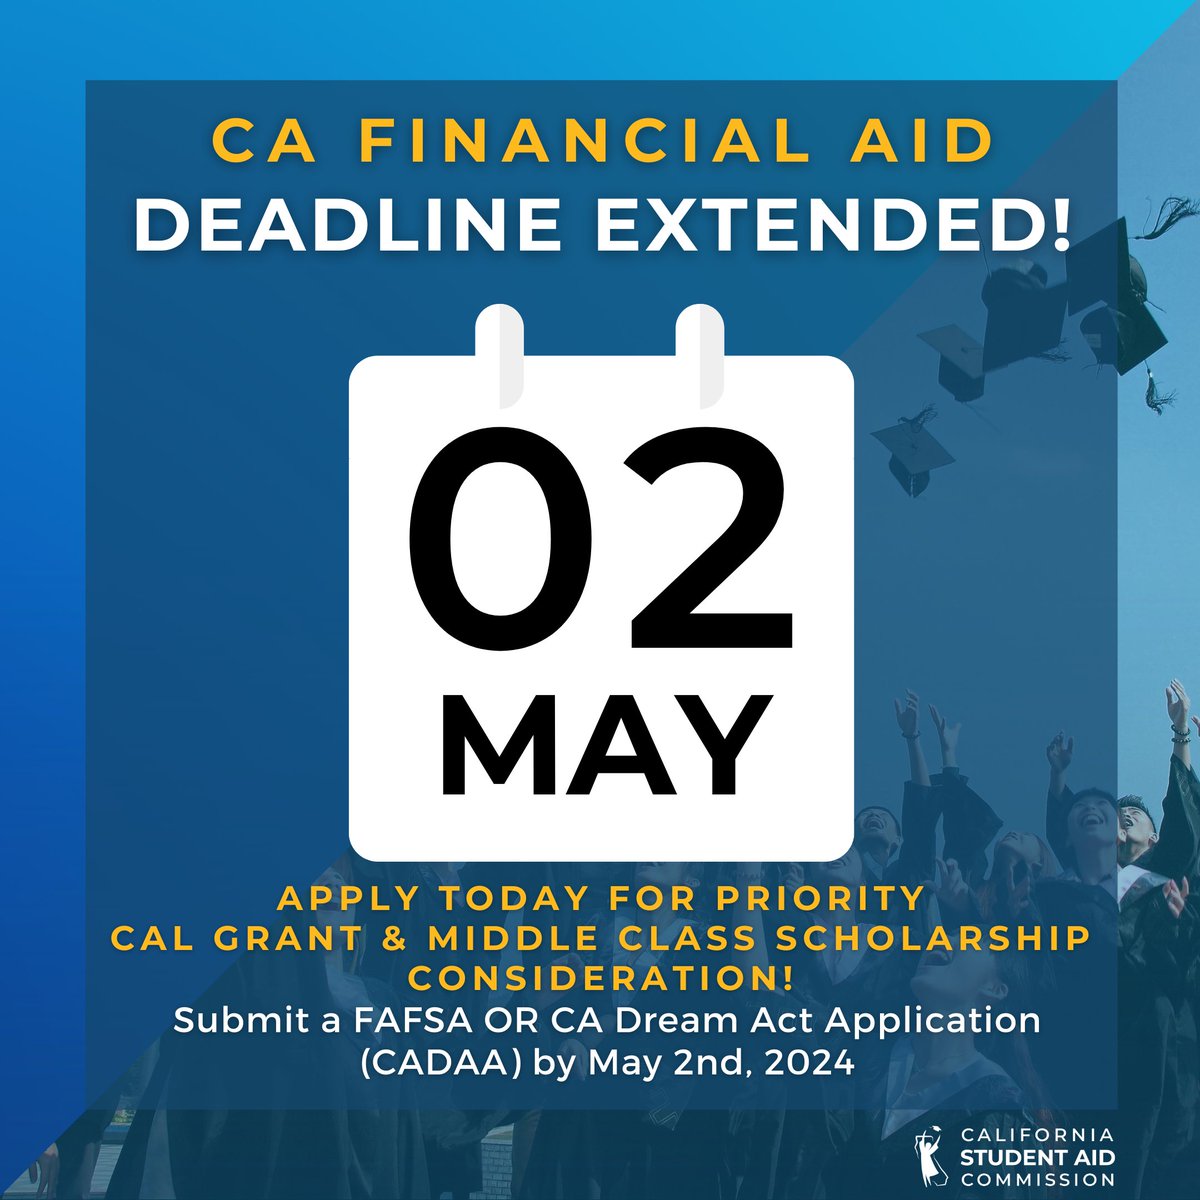 CALIFORNIA DEADLINE EXTENDED! The California Legislature passed an extension on the state priority deadline in California to May 2, 2024. Sign up today for a free workshop at castudentaid.org/c4c to get help completing your application.